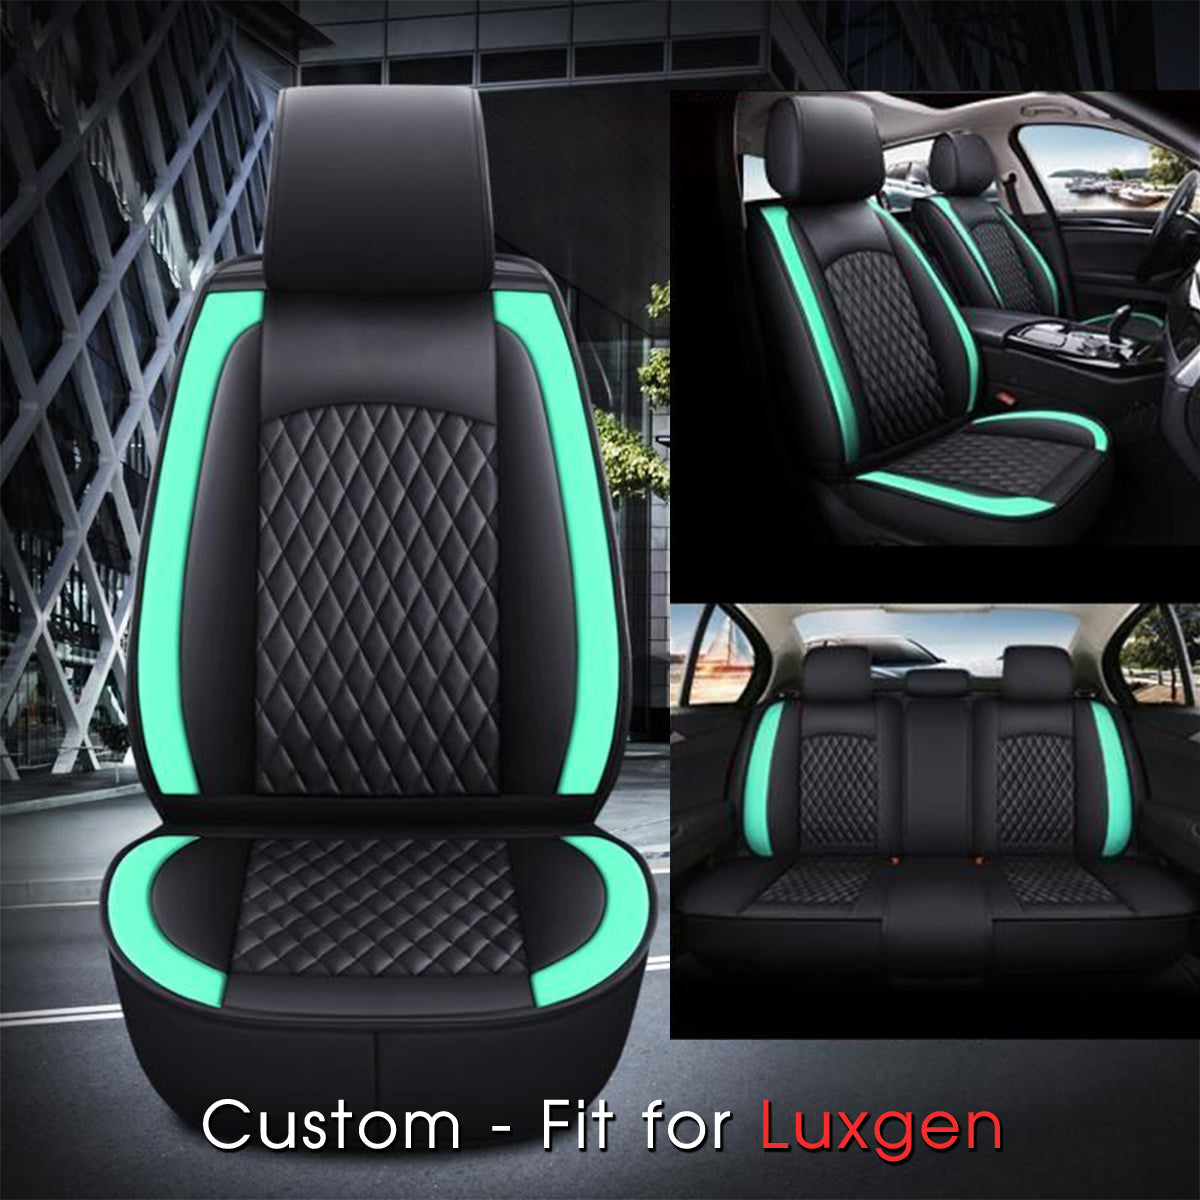 2 Car Seat Covers Full Set, Custom-Fit For Car, Waterproof Leather Front Rear Seat Automotive Protection Cushions, Car Accessories WALE211